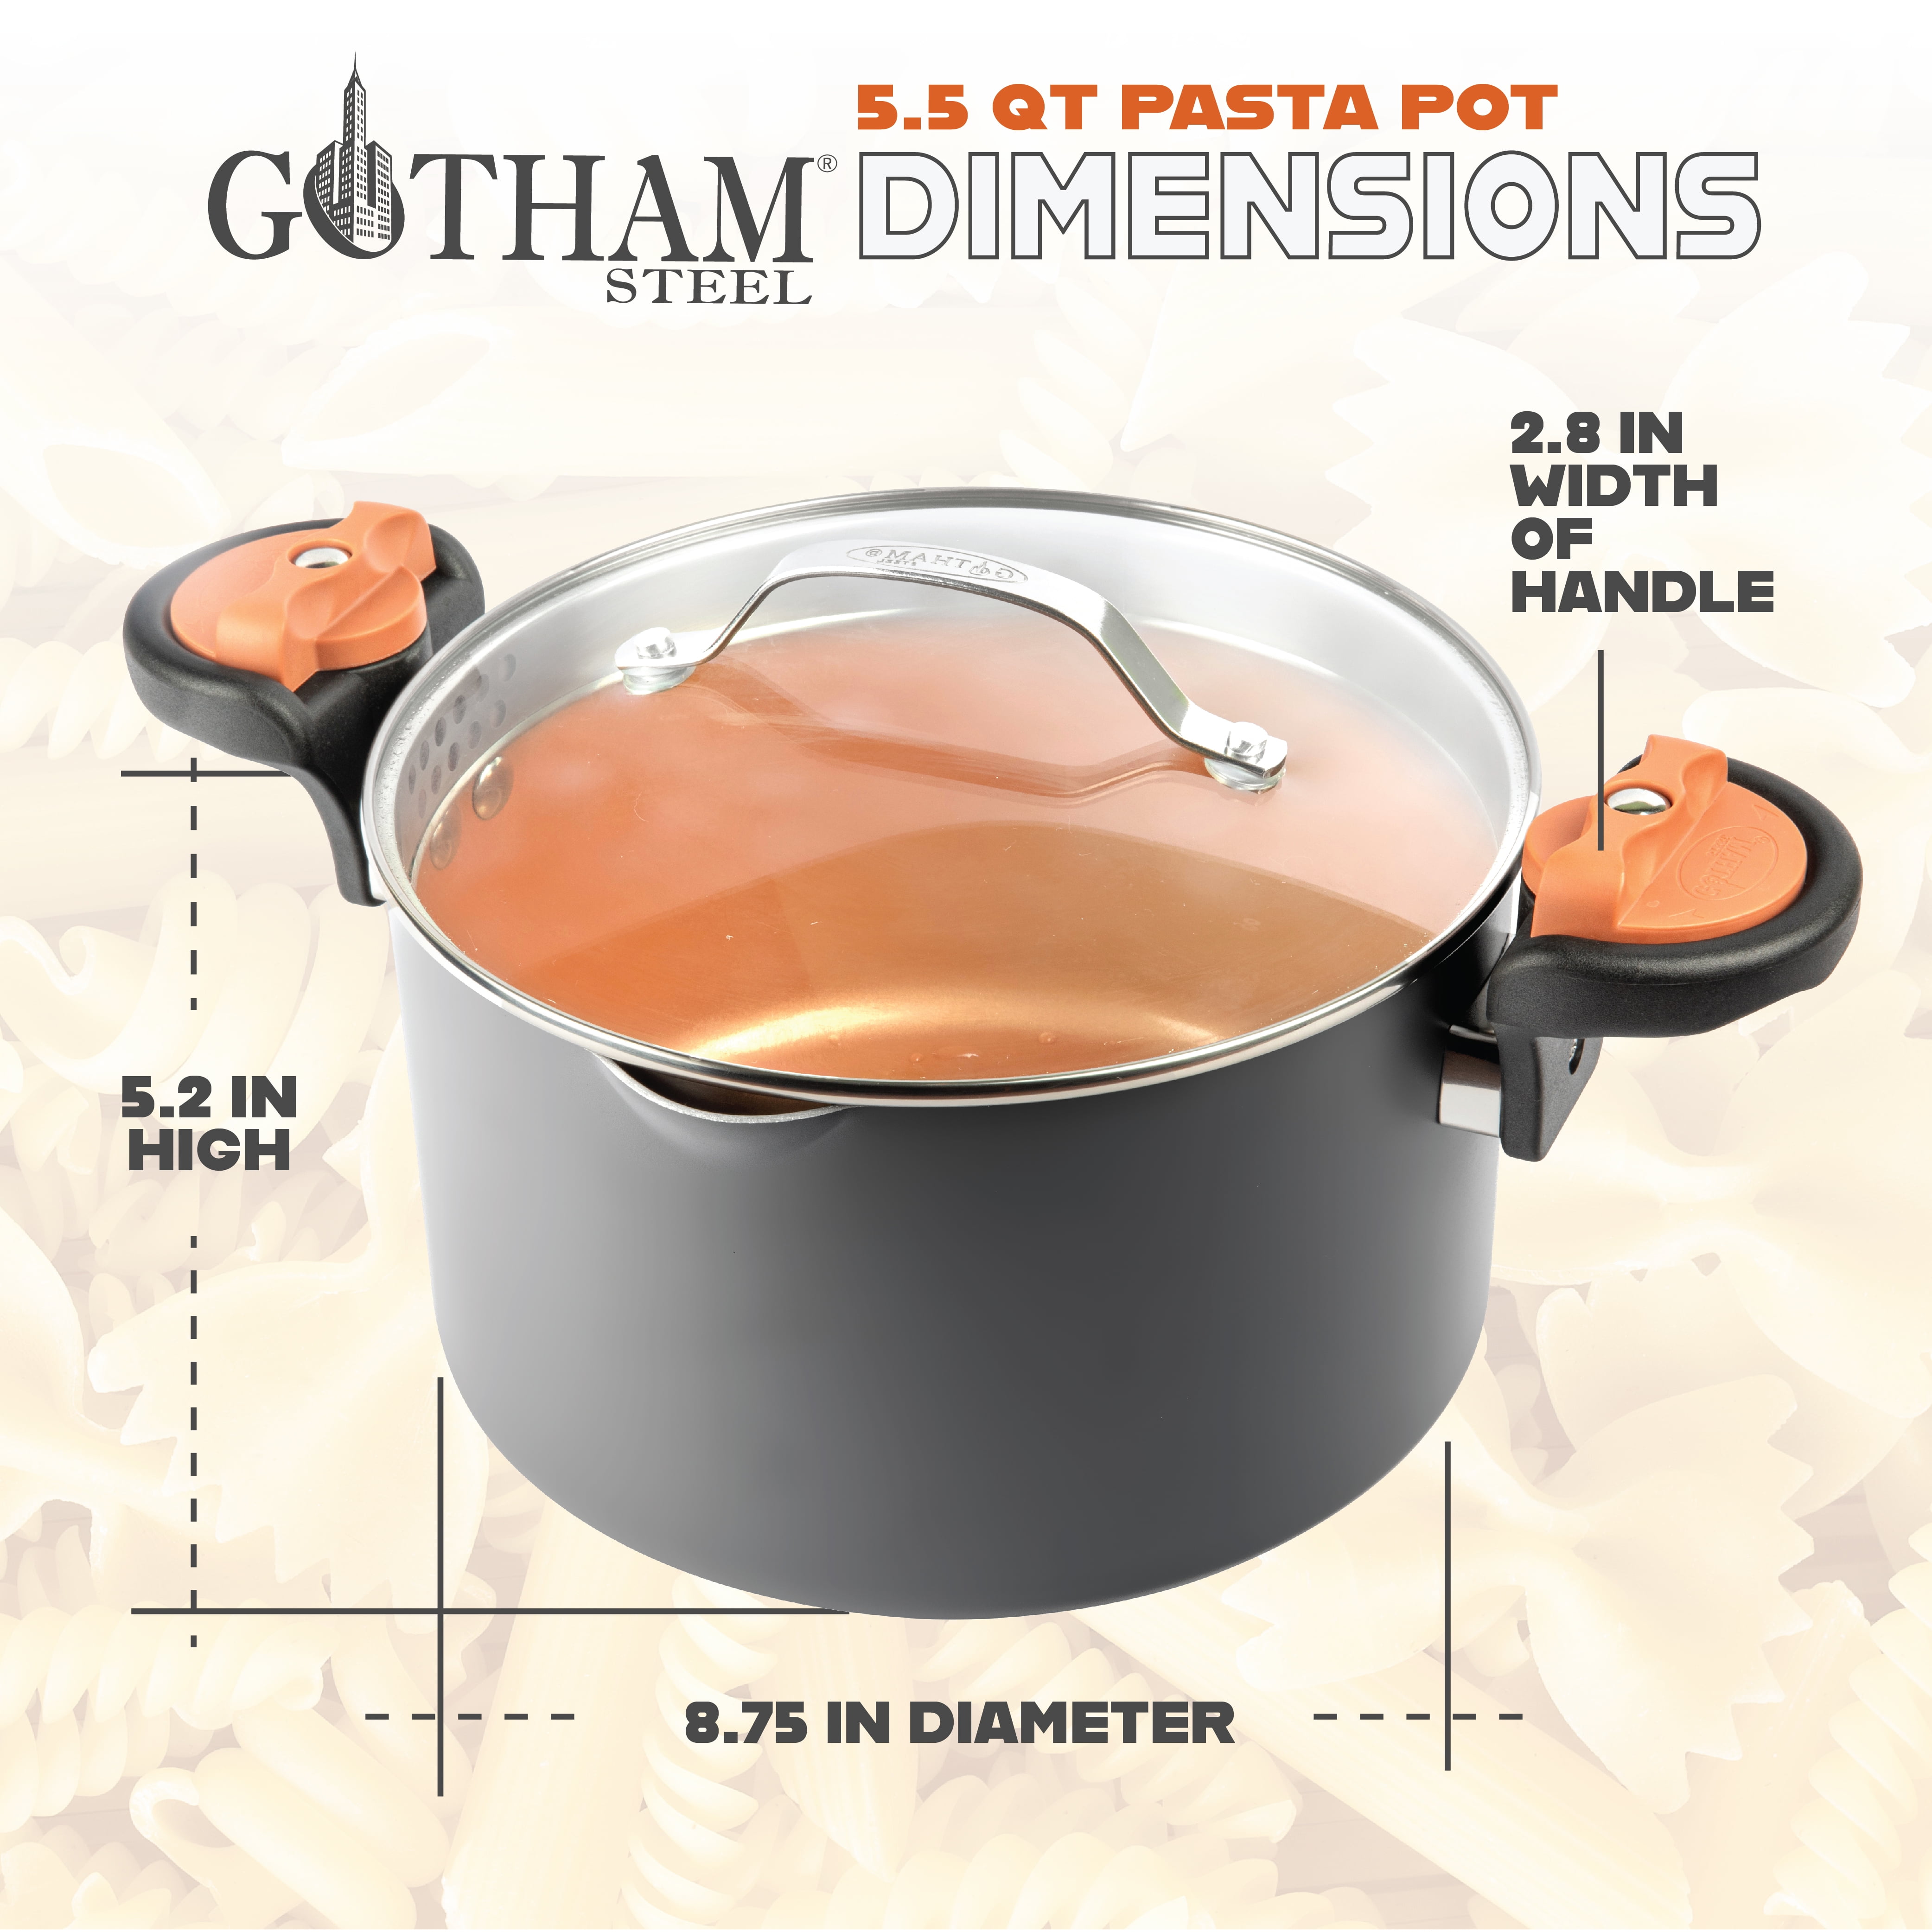 Gotham Steel 5 Qt Stock Pot Nonstick Pasta Pot Soup Pot with Ti-Cerama  Copper Coating with Patented Built in Strainer Lid, Twist N Lock Handles -  As